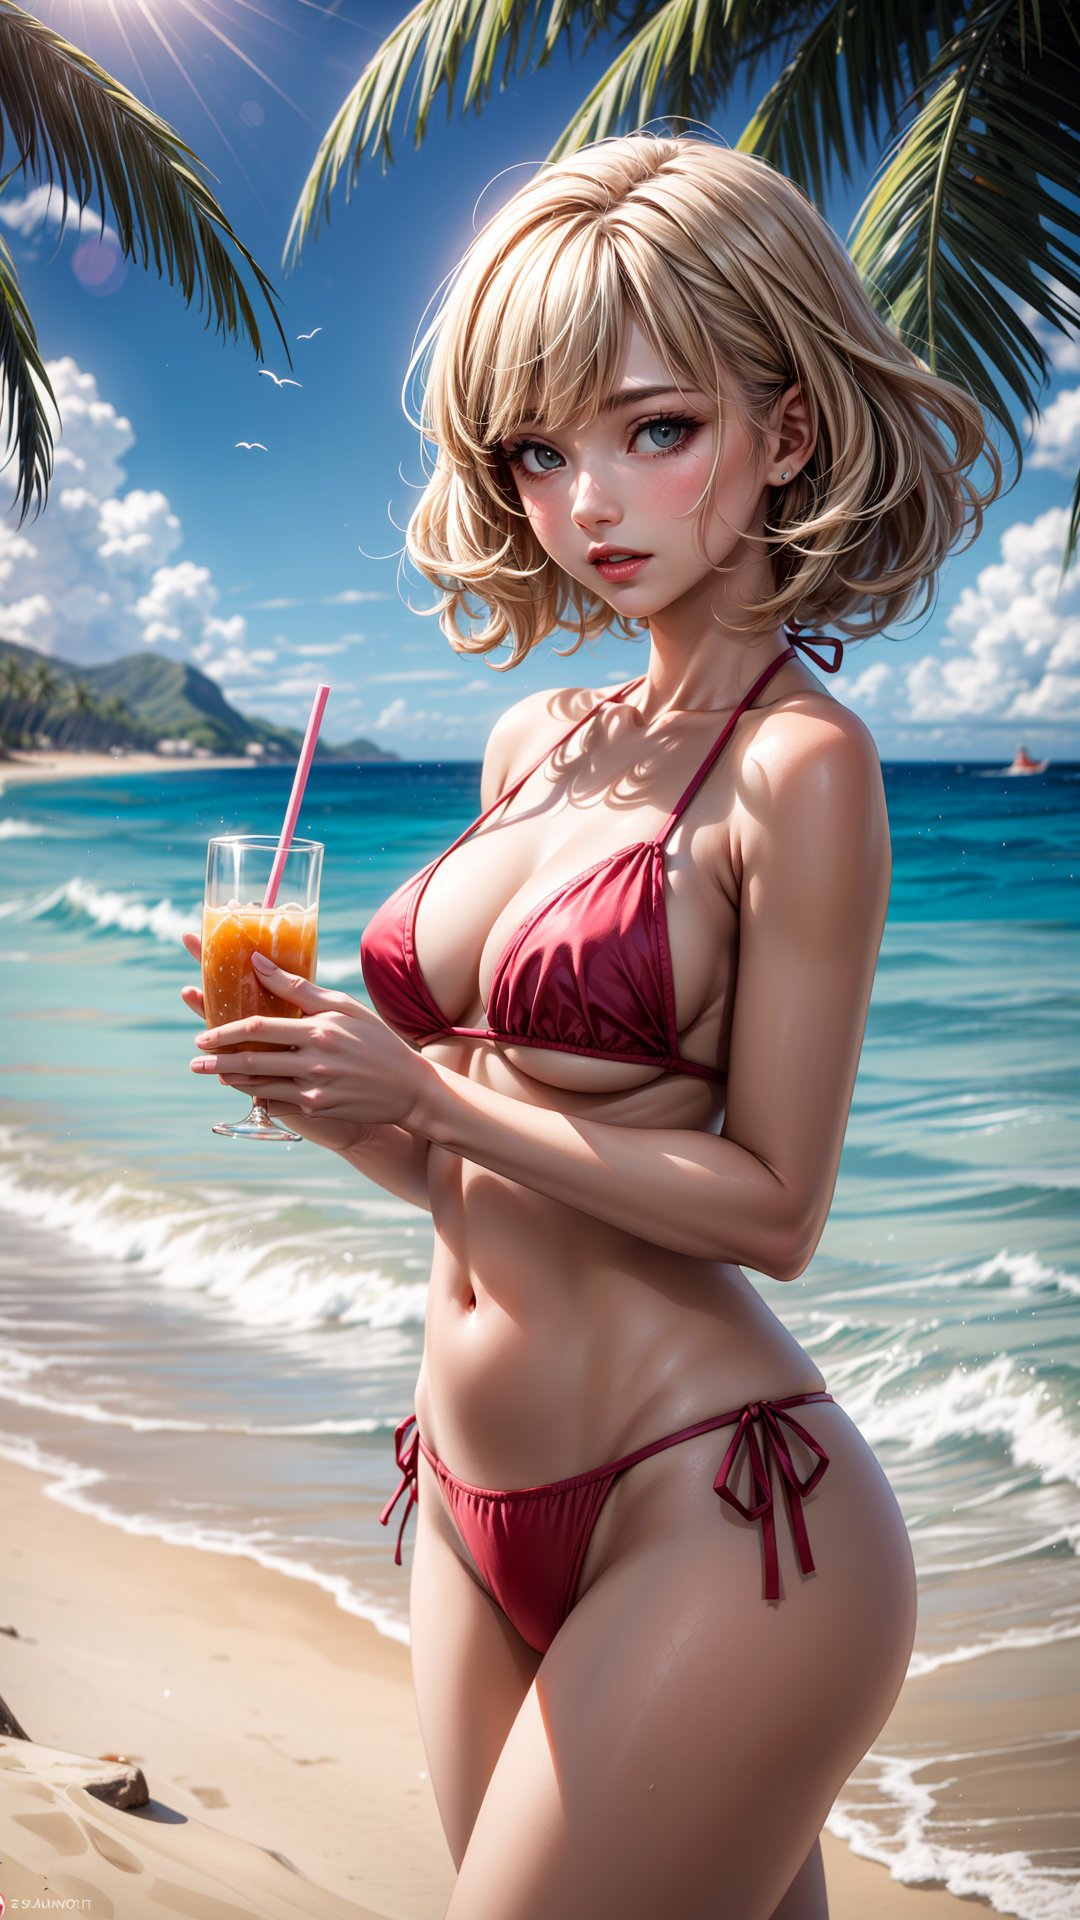 Imagine a sun-kissed beach scene,  where azure waves gently caress the shore and golden sands stretch as far as the eye can see. Amidst the rhythmic sounds of the ocean,  envision a young woman with cascading blonde,  curly hair,  dressed in a vibrant beachwear ensemble dominated by shades of pink. She holds a refreshing juice in hand,  its vivid colors mirroring the tropical surroundings. Capture the joyous moment as she takes a sip,  the fruity aroma mingling with the salty sea breeze. Dive into the details of her attire,  the way the pink hues complement the azure backdrop,  and how her carefree spirit harmonizes with the soothing rhythm of the waves. Transport yourself to this sunlit haven where the beach and the woman in pink create a picturesque symphony of leisure and tranquility.,<lora:EMS-179-EMS:0.800000>